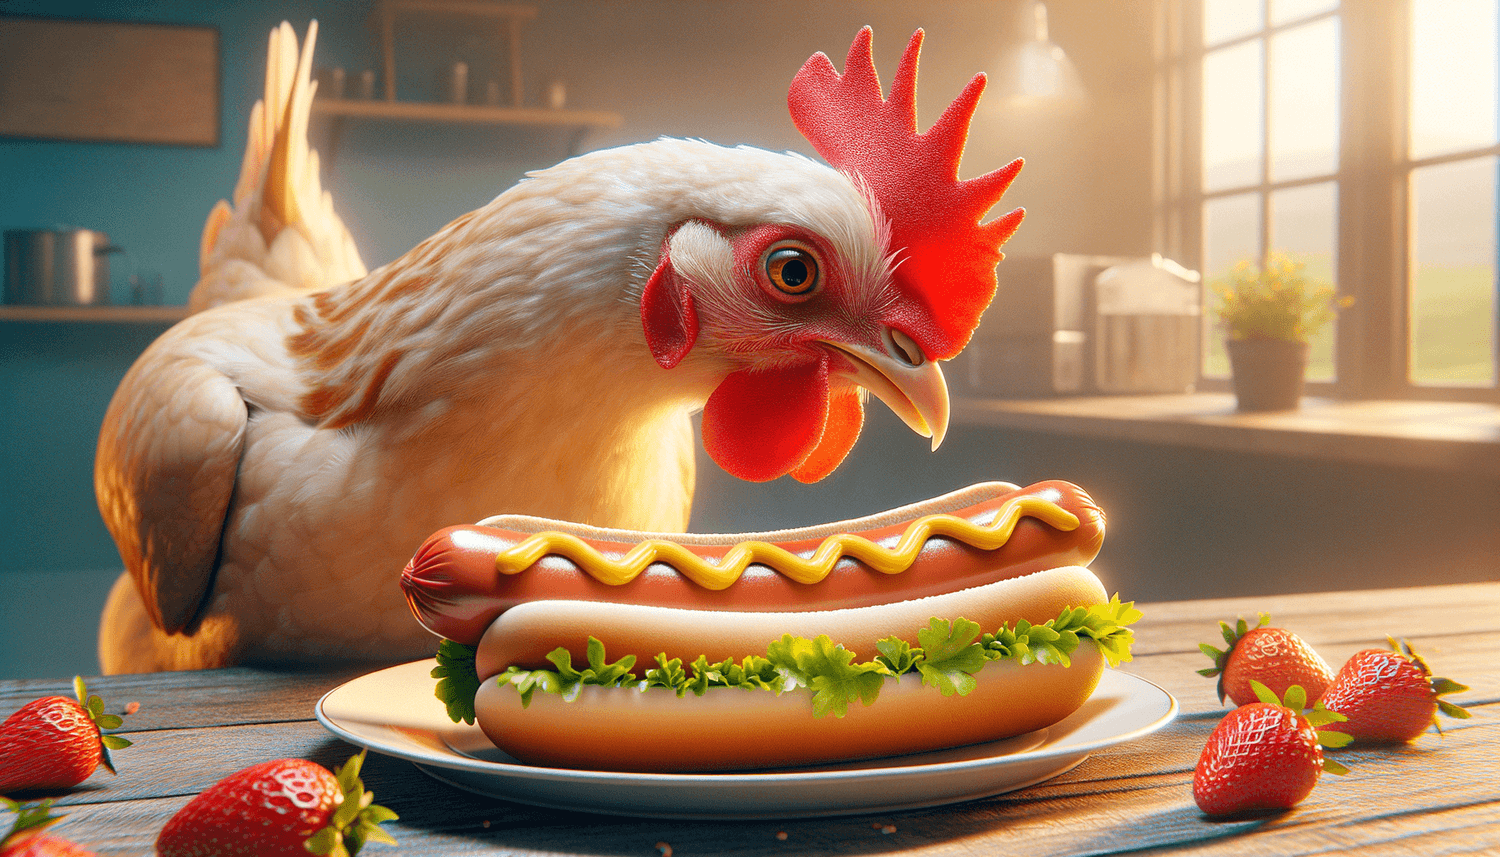 Can Chickens Eat Hot Dogs?